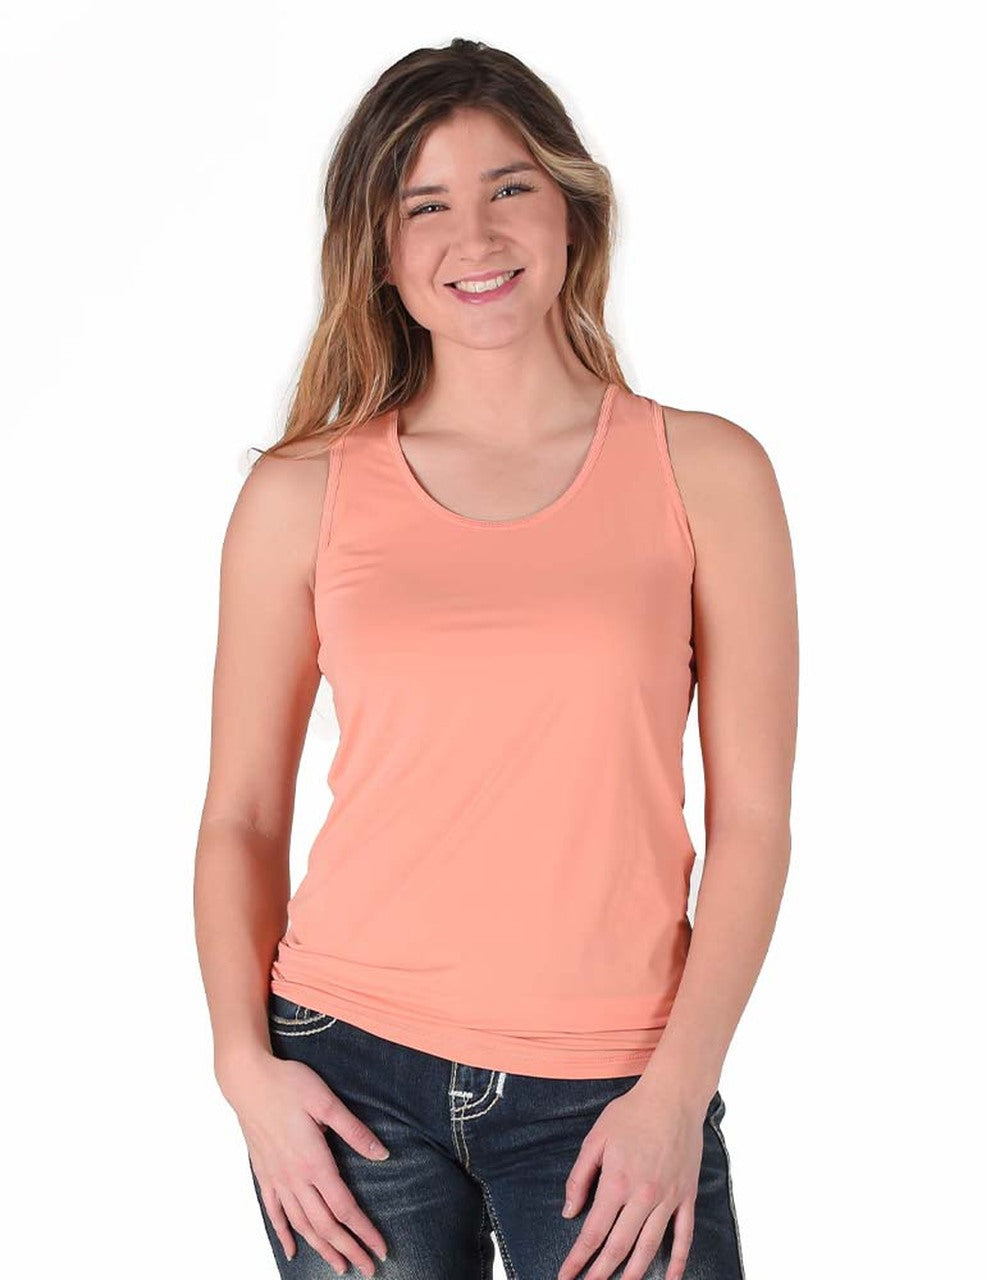 COWGIRL TUFF Women's Coral Breathe Instant Cooling UPF Racerback Tank